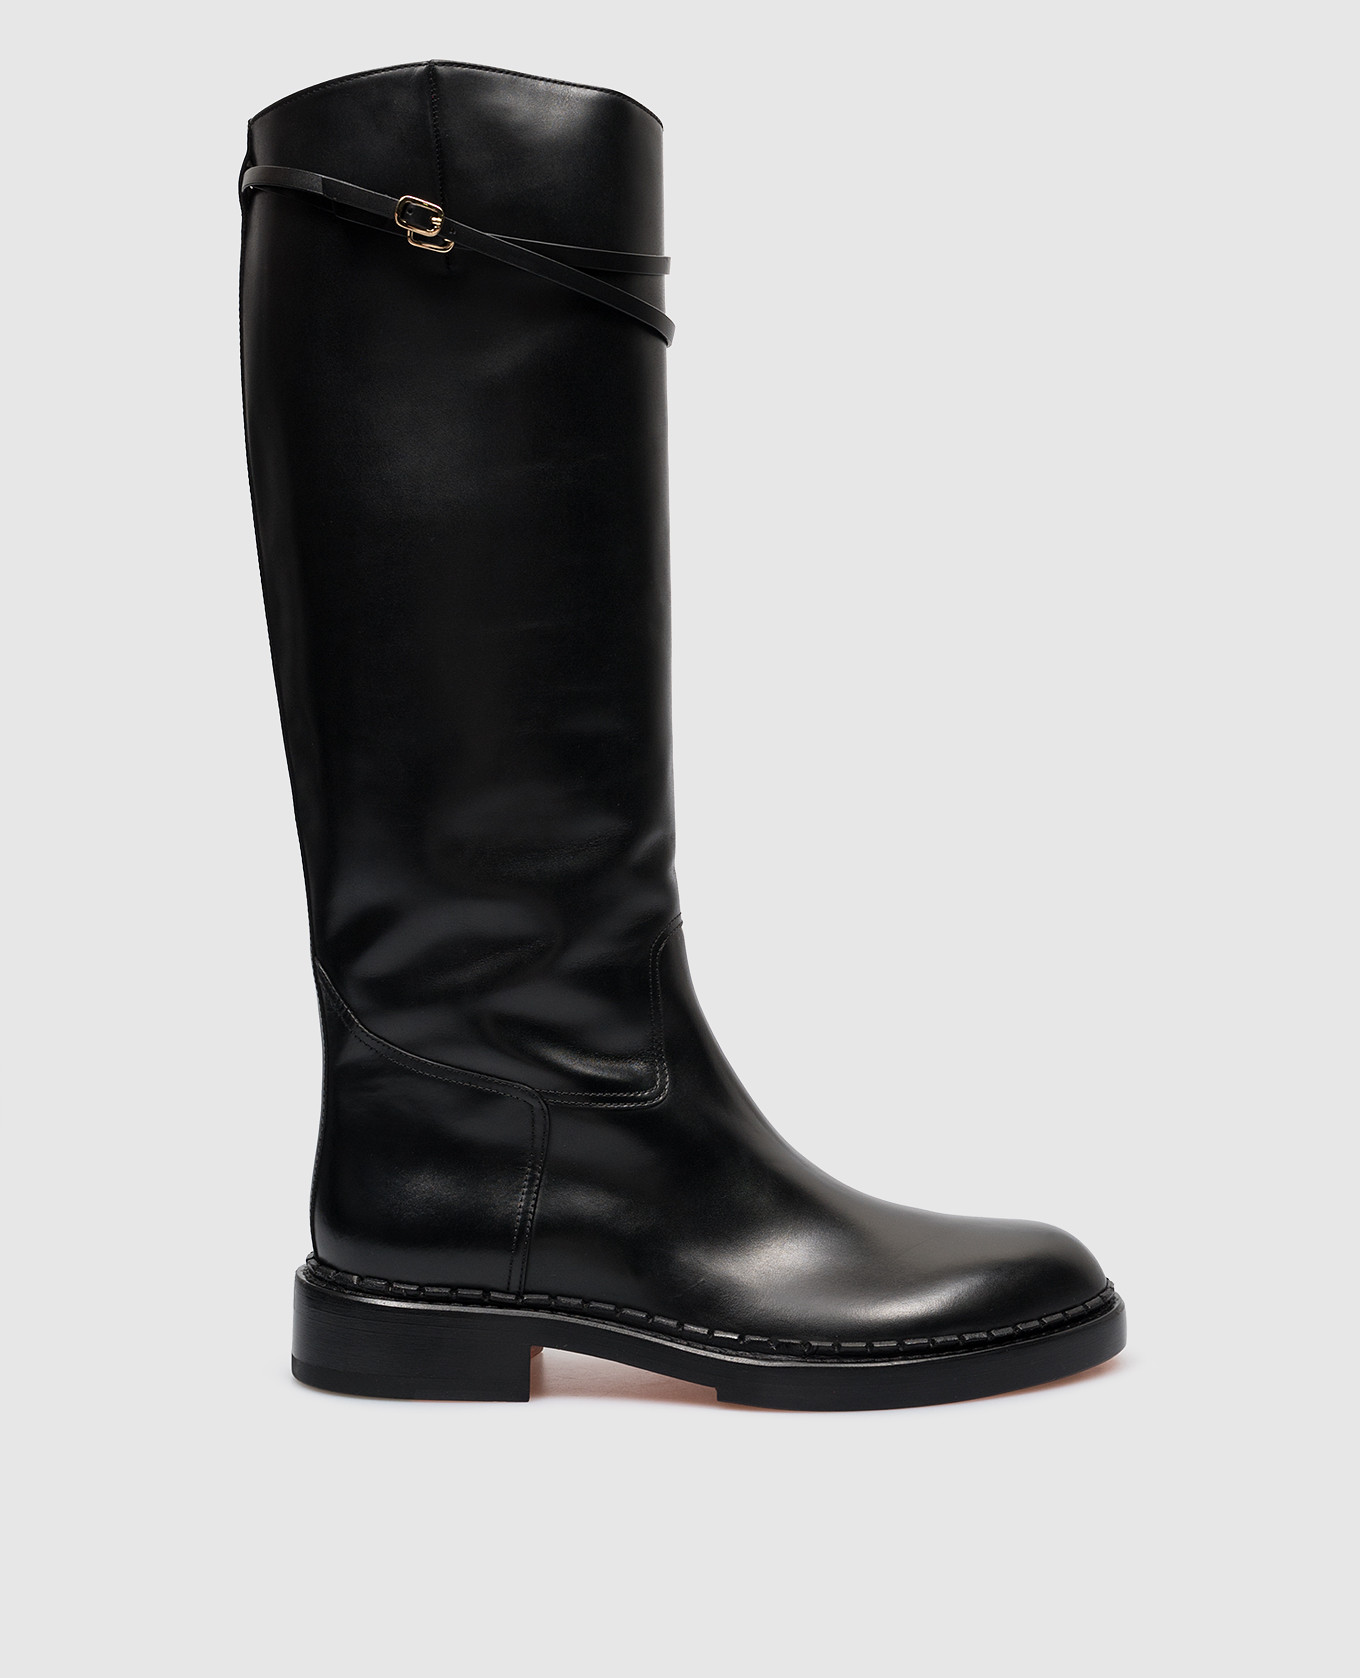 Black leather boots with straps